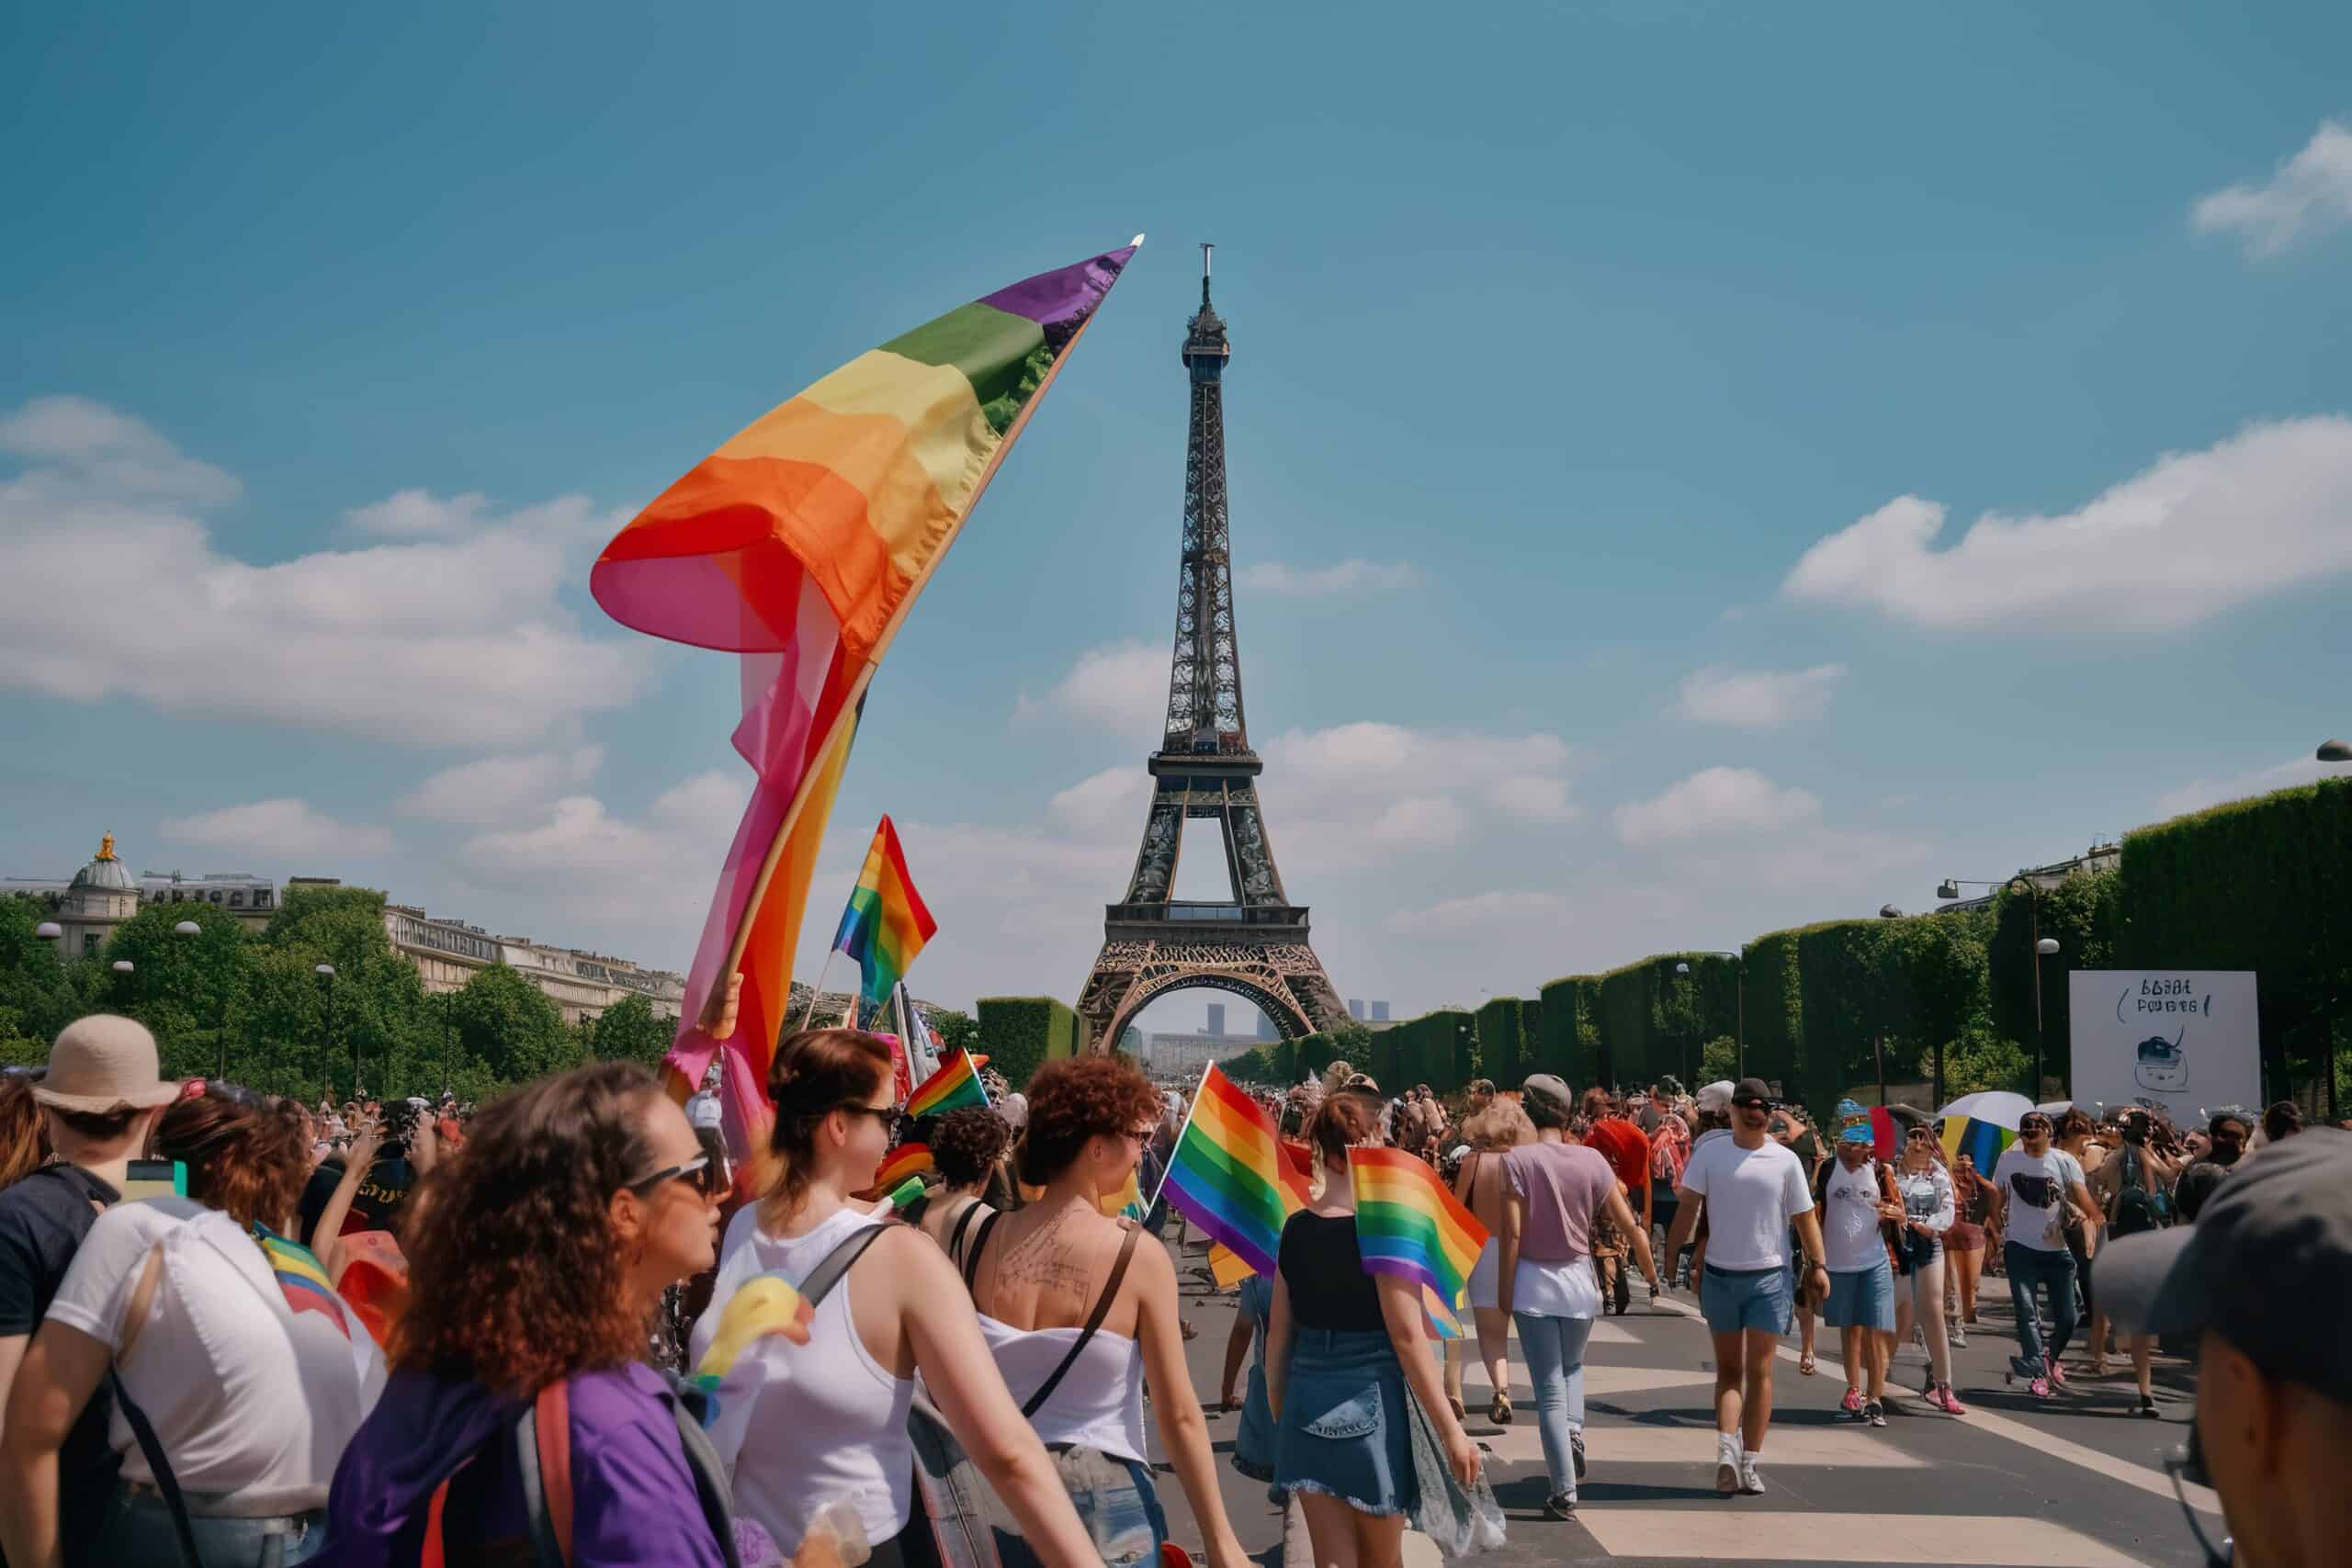 A group of people walking towards the Eiffel Tower in Paris waving and holding gay Pride flags. 